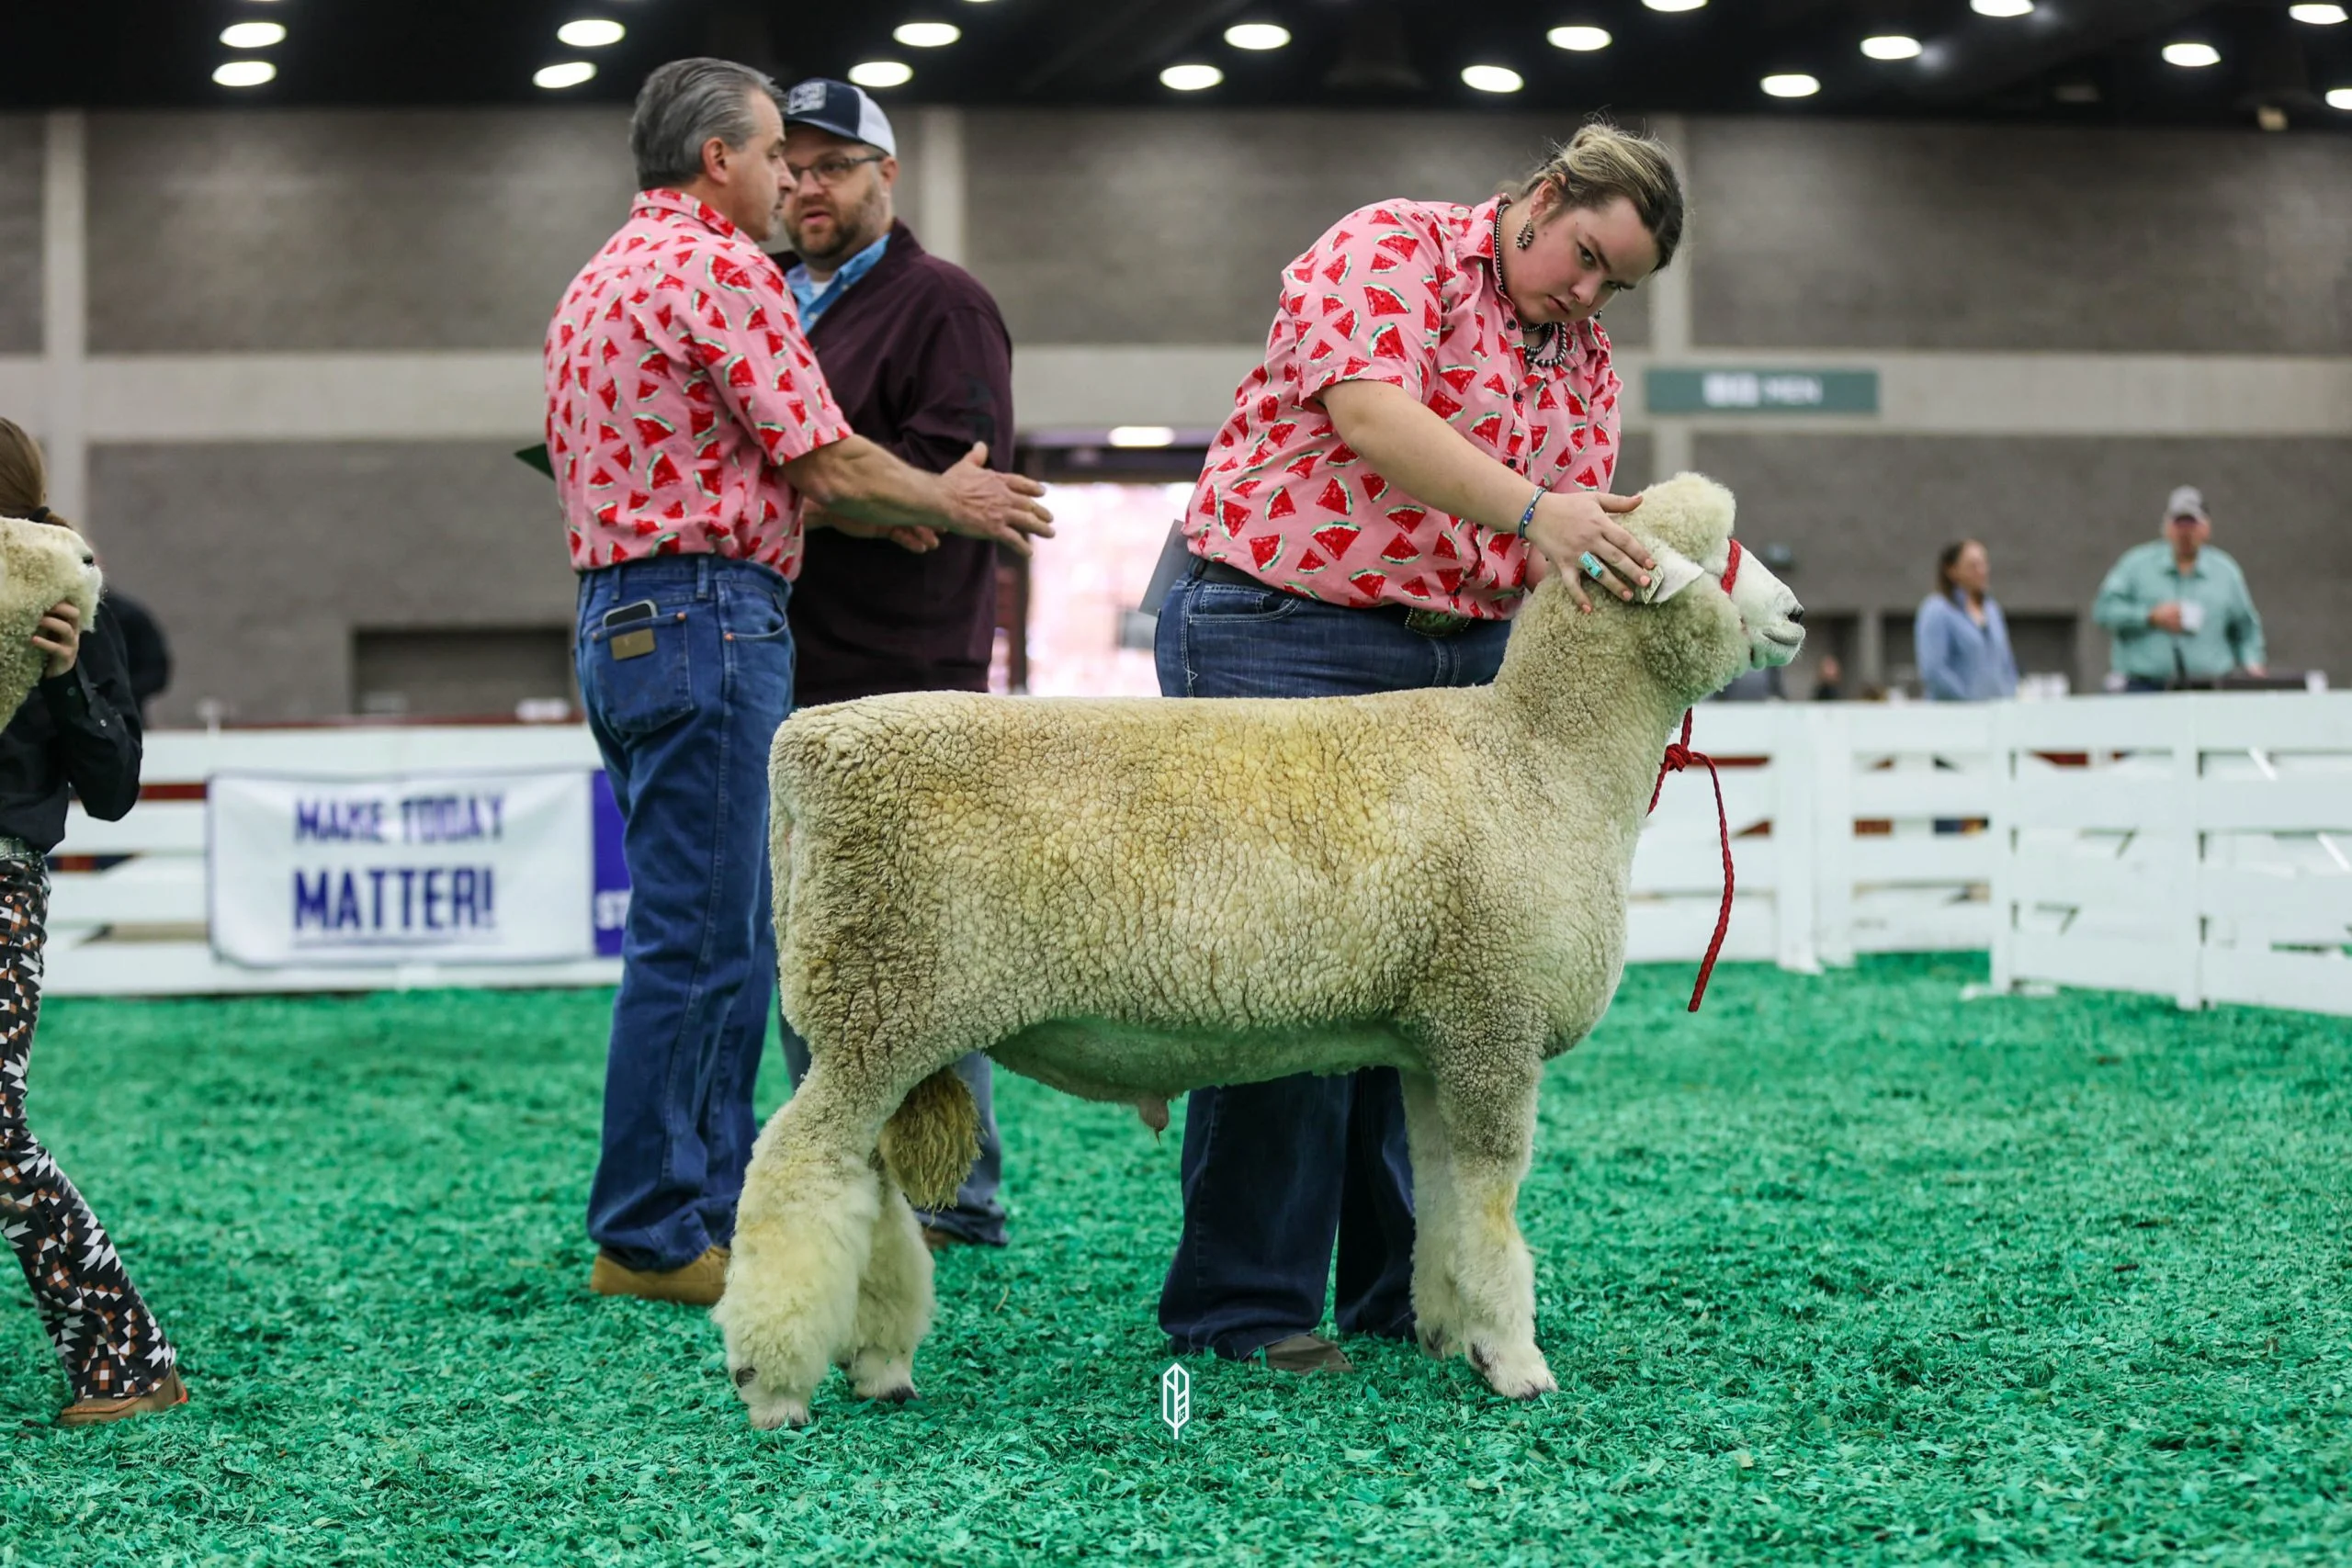 2023 National White Romney Show at NAILE
1st place winter ram lamb exhibited by Caitlin Plank